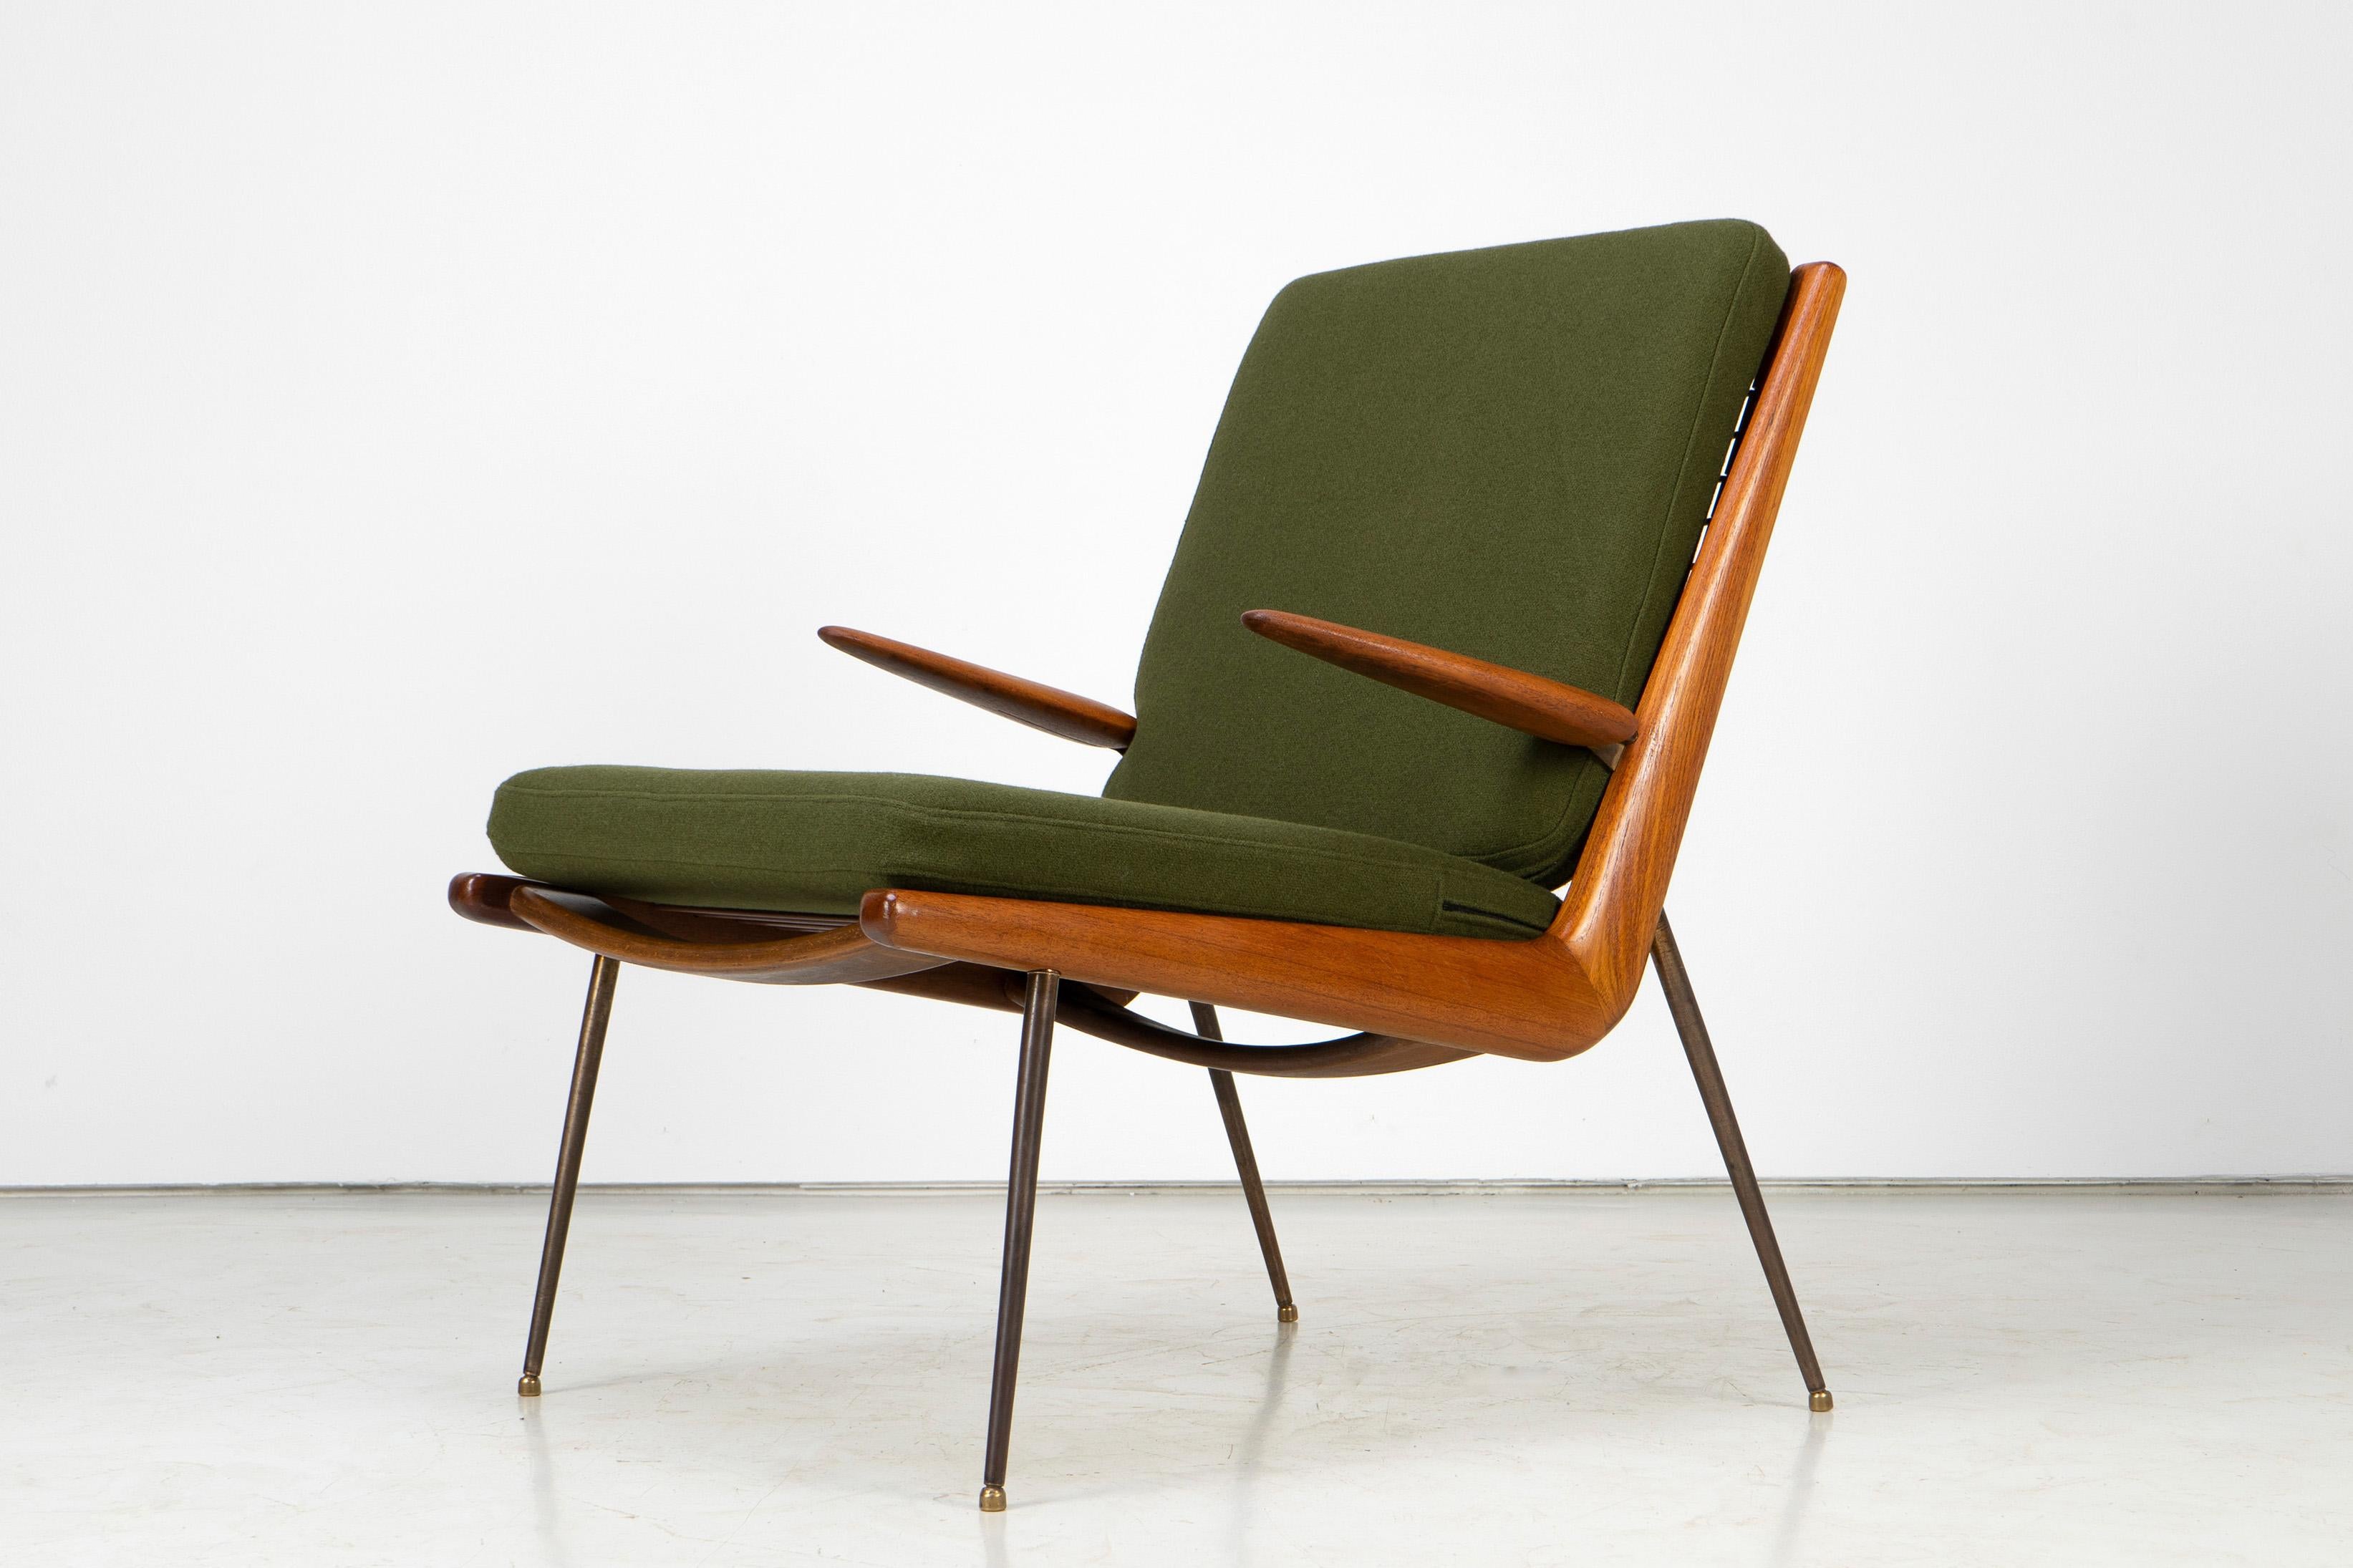 Filigree easy chair in teak with brass legs, designed by Peter Hvidt and Orla Molgaard Nielsen, produced by France & Daverkosen. The chair is in excellent, used condition. The upholstery has been renewed with fabric by Kvadrat. Labeled on the frame.